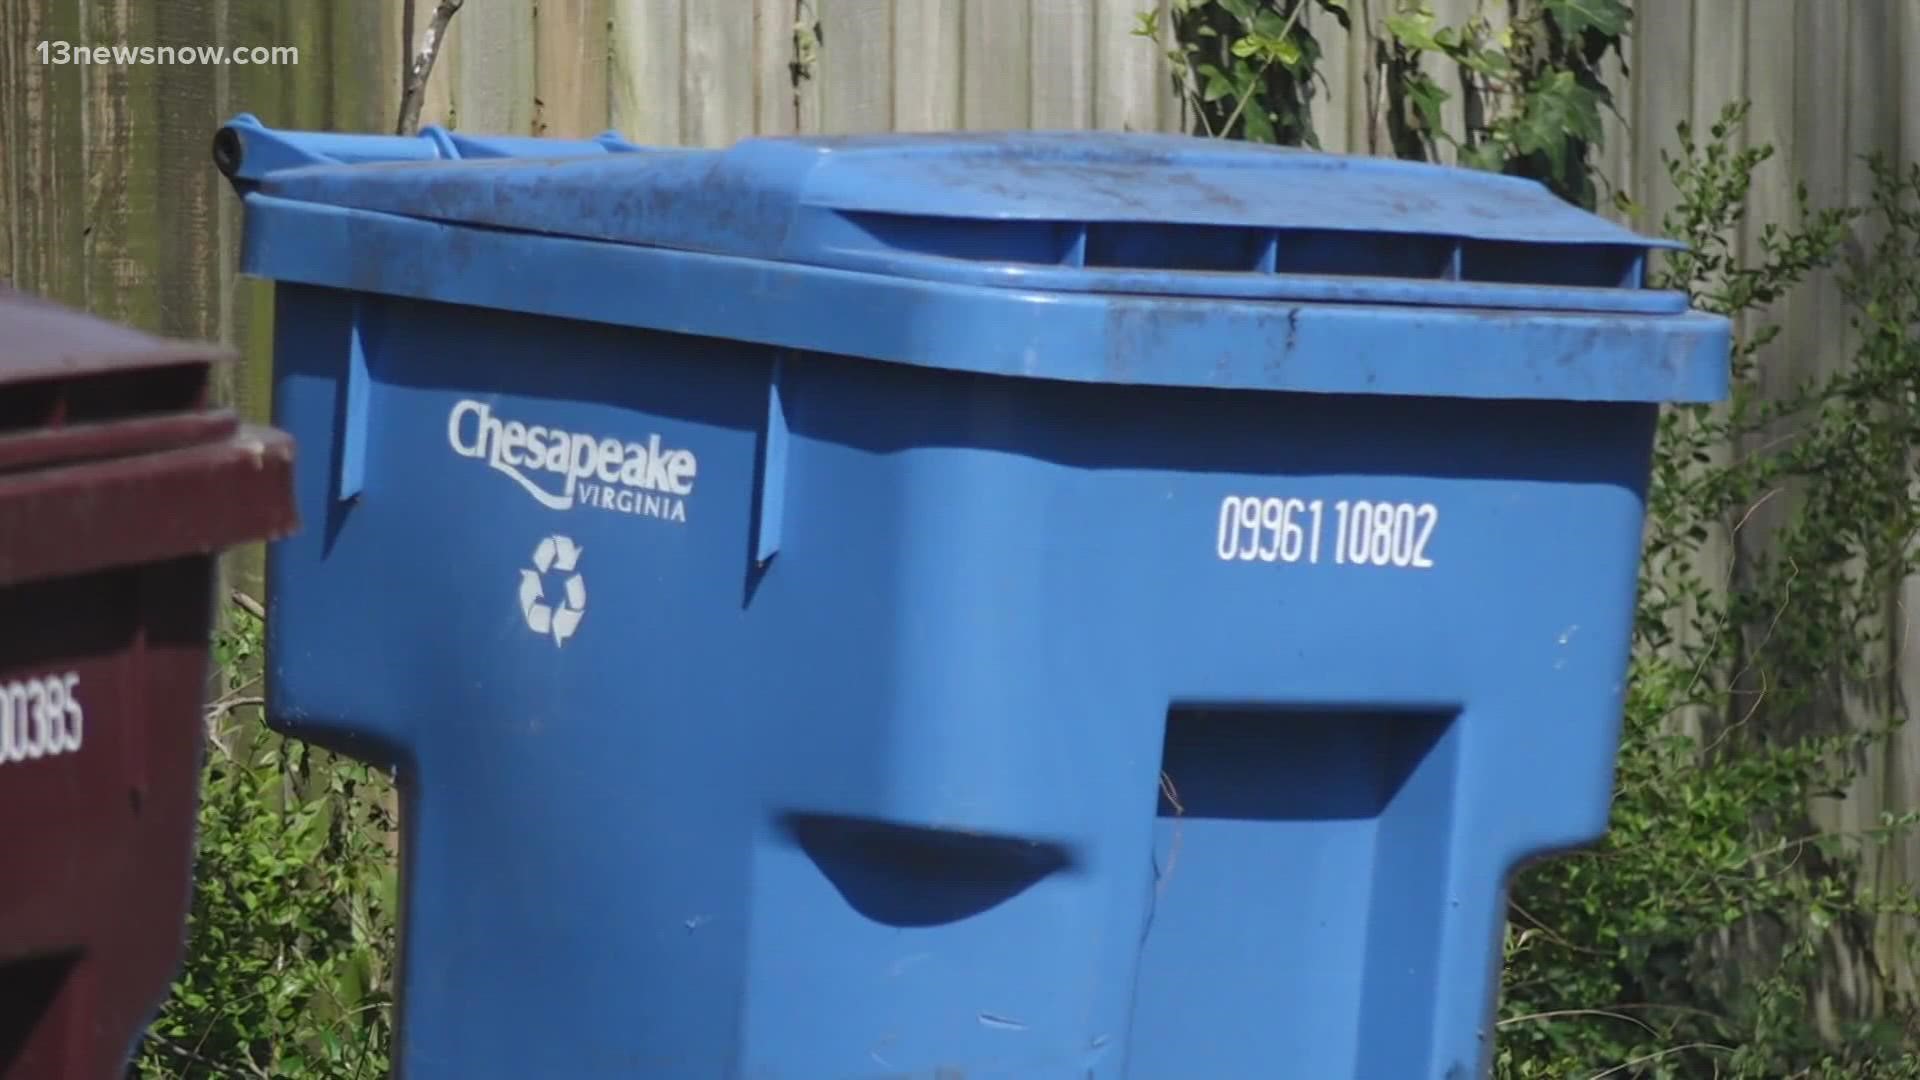 The city's curbside recycling contract was supposed to expire on July 1, but officials announced that changes are coming over a week earlier.